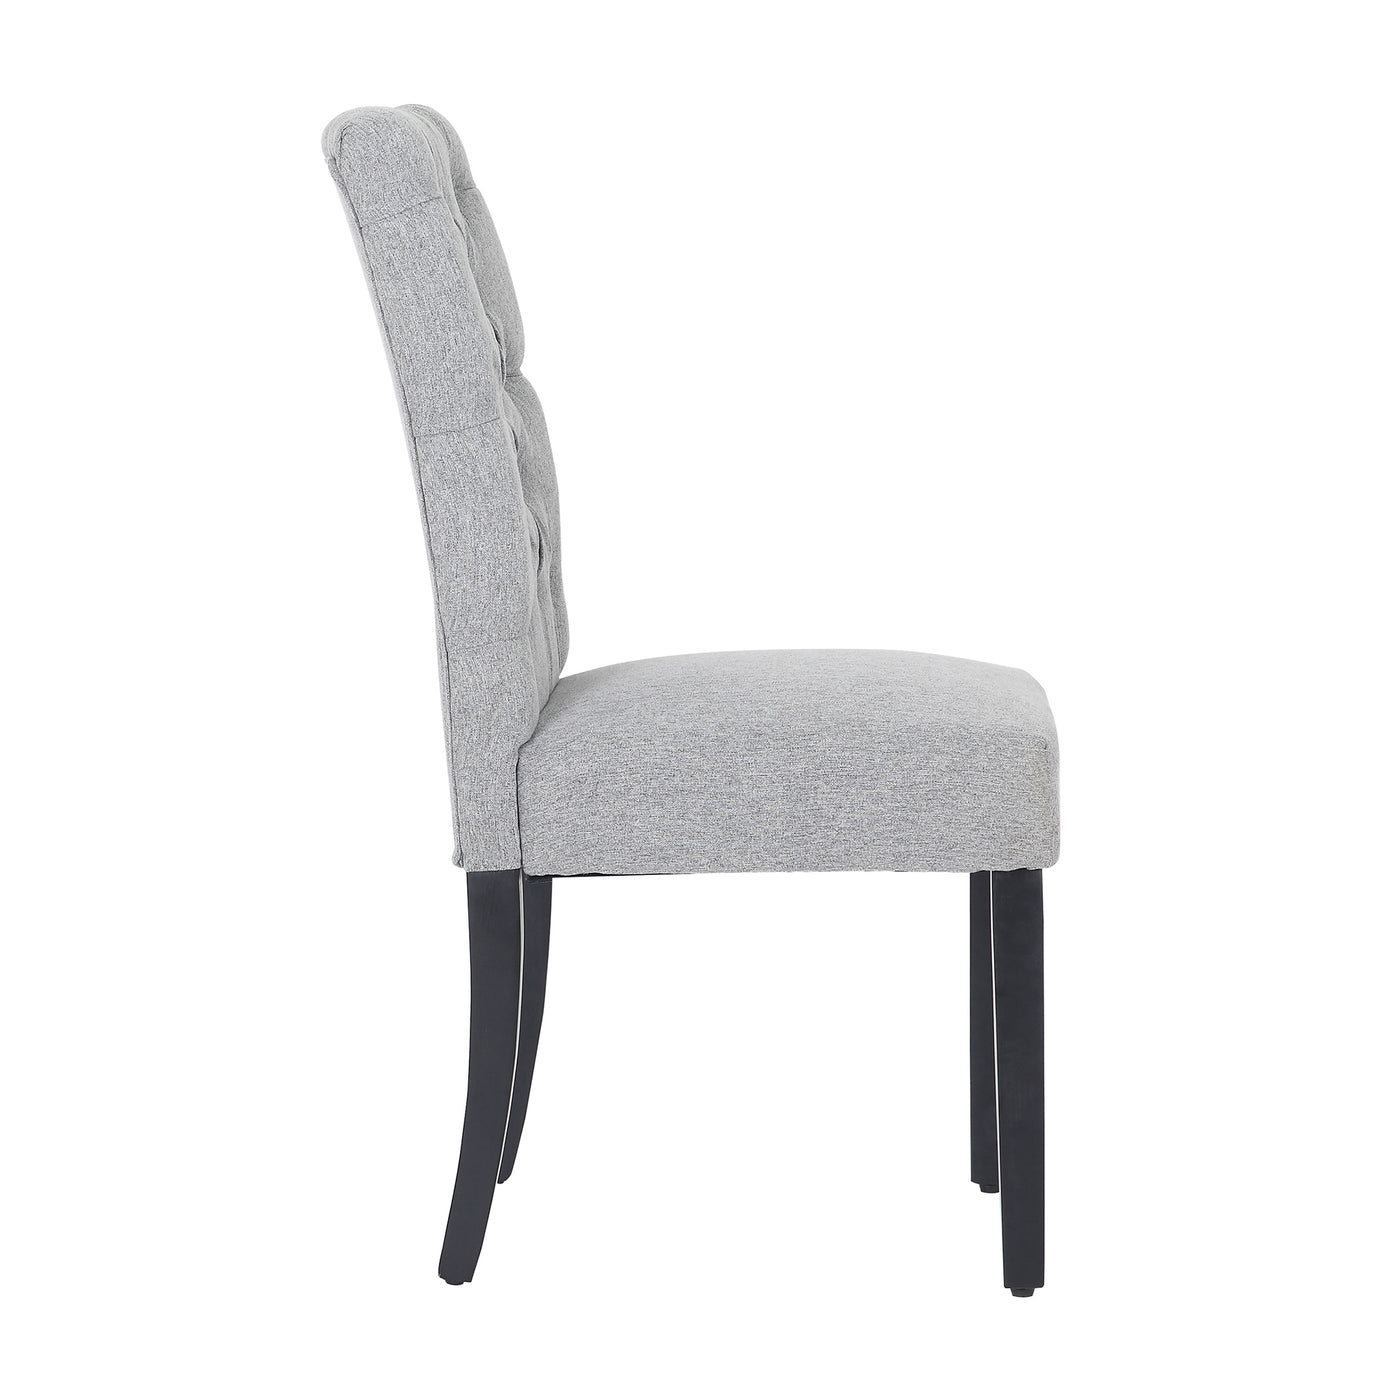 Hayes Upholstered Button Tufted Dining Chair (Set of 2)